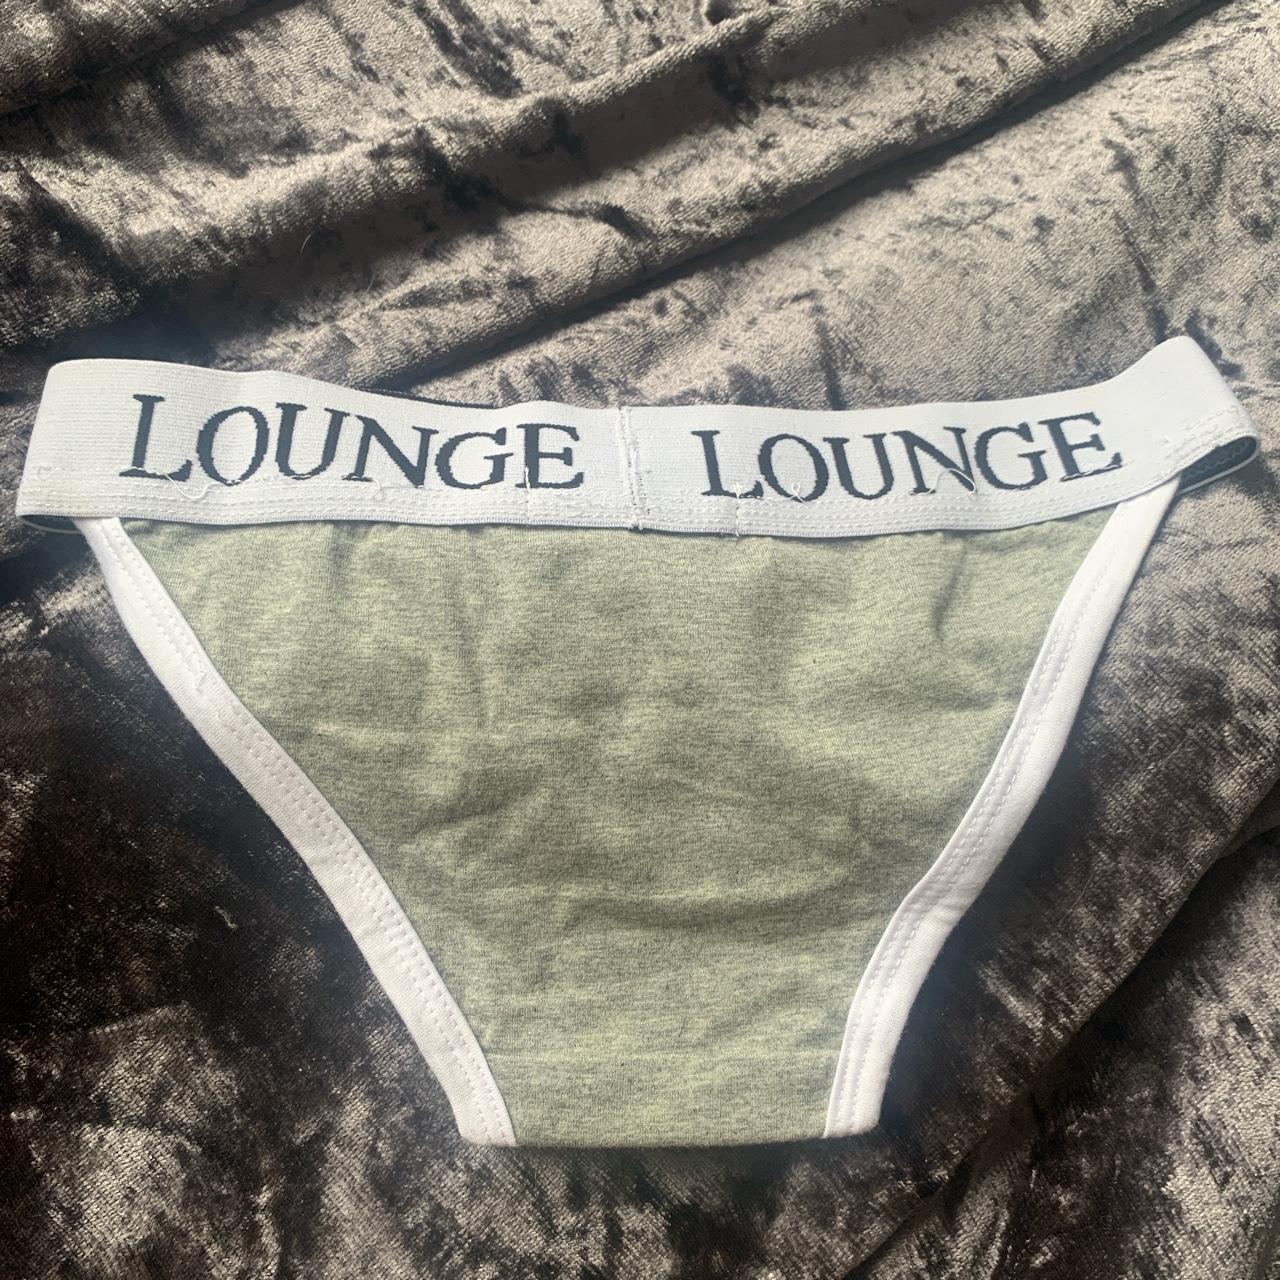 lounge underwear, Size small (would fit a 4-6), Never